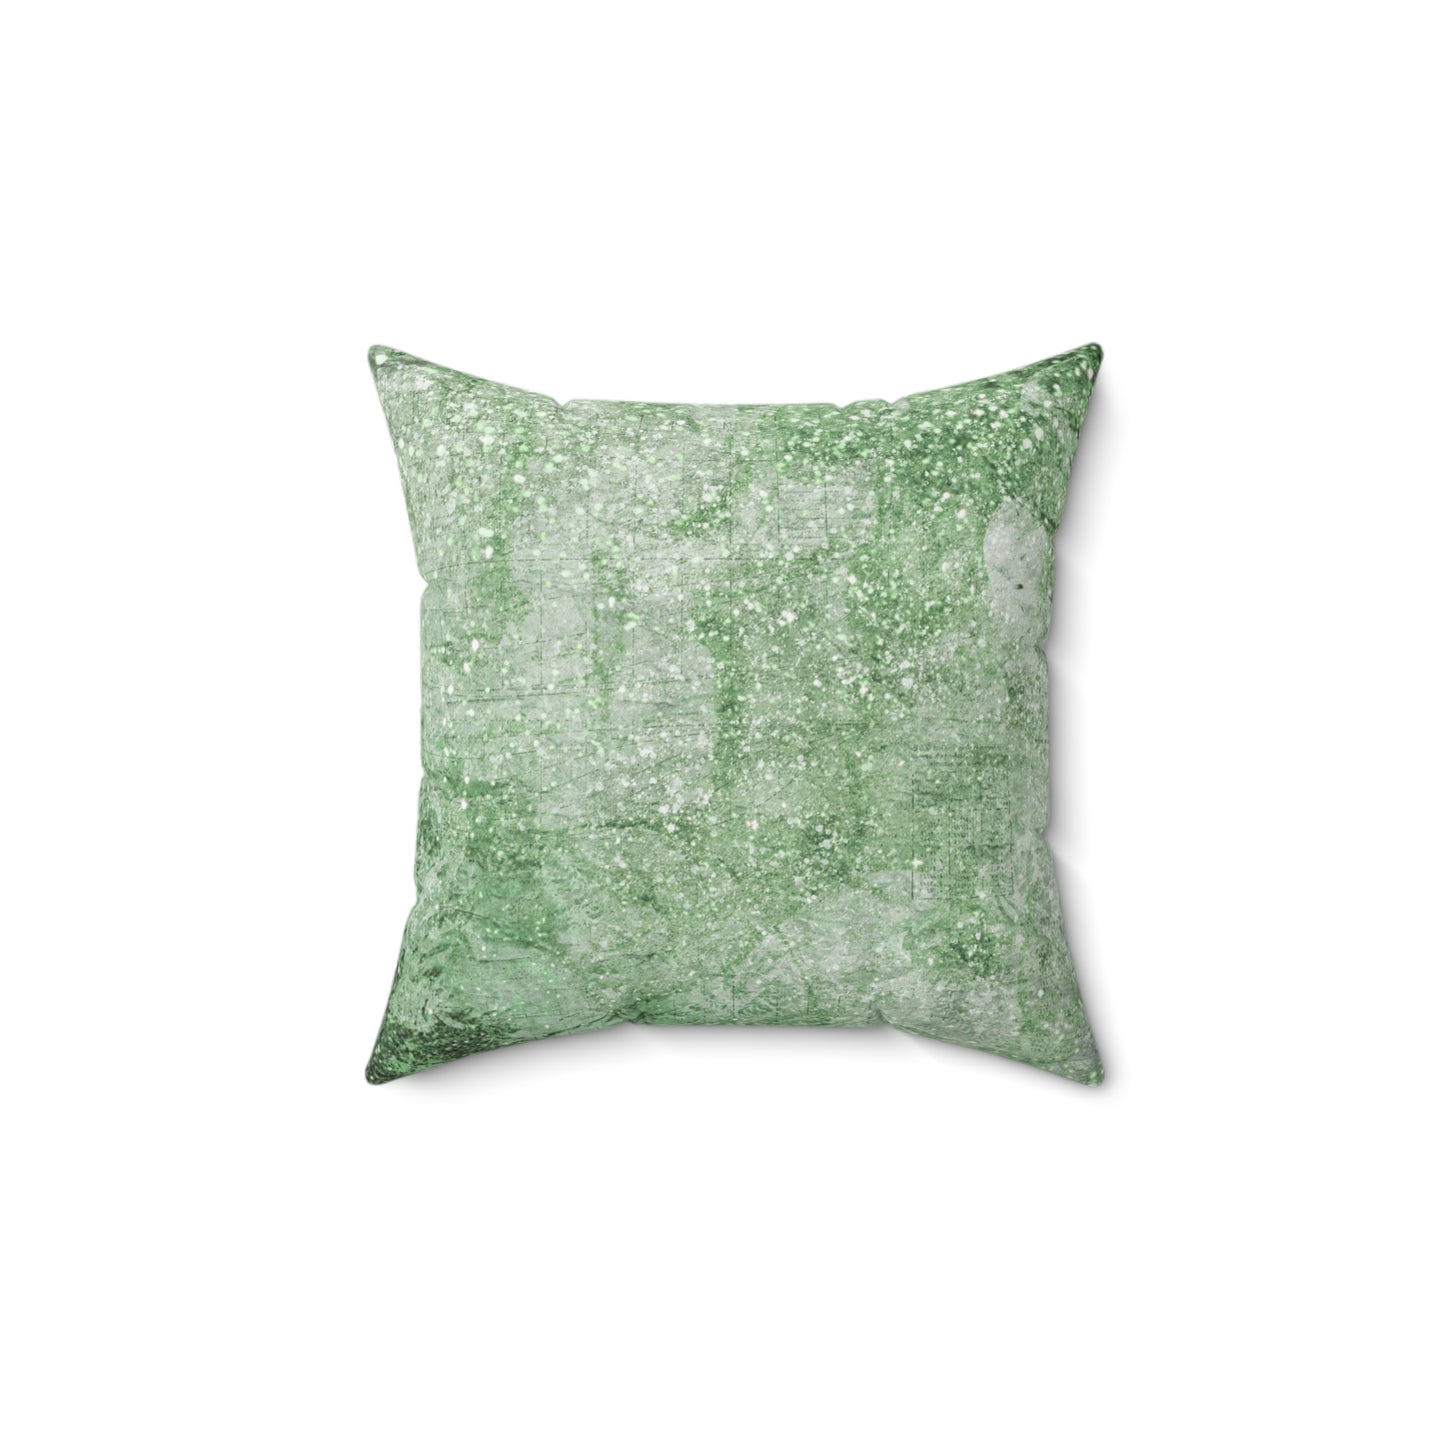 Glimmery Green Crumpled Vintage News Print Style Faux Suede Soft Square Pillow